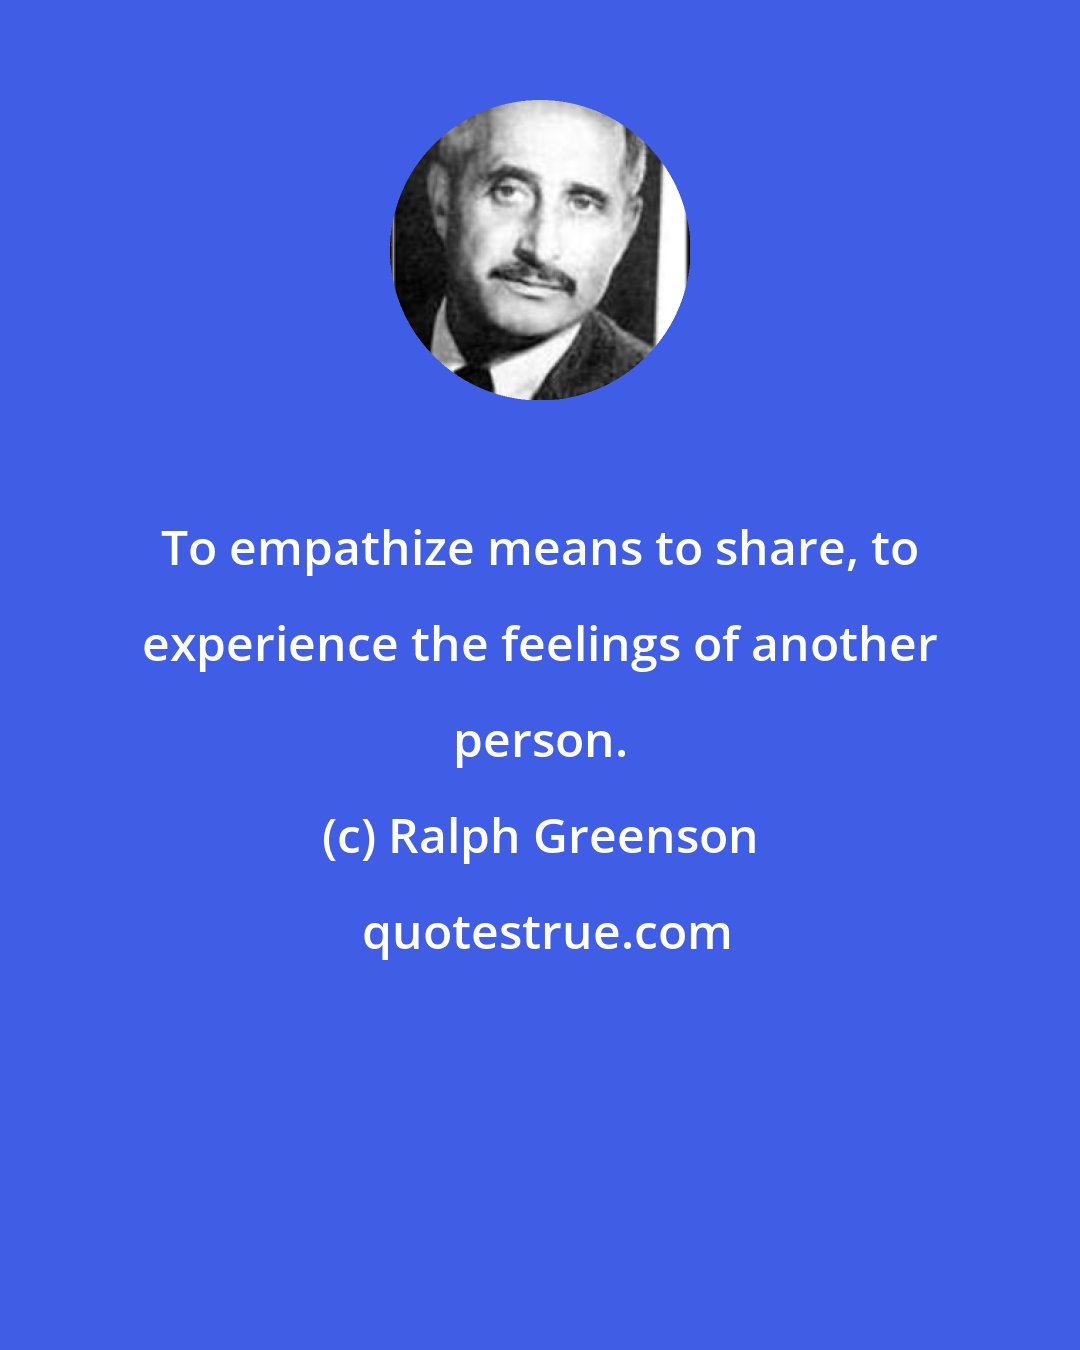 Ralph Greenson: To empathize means to share, to experience the feelings of another person.